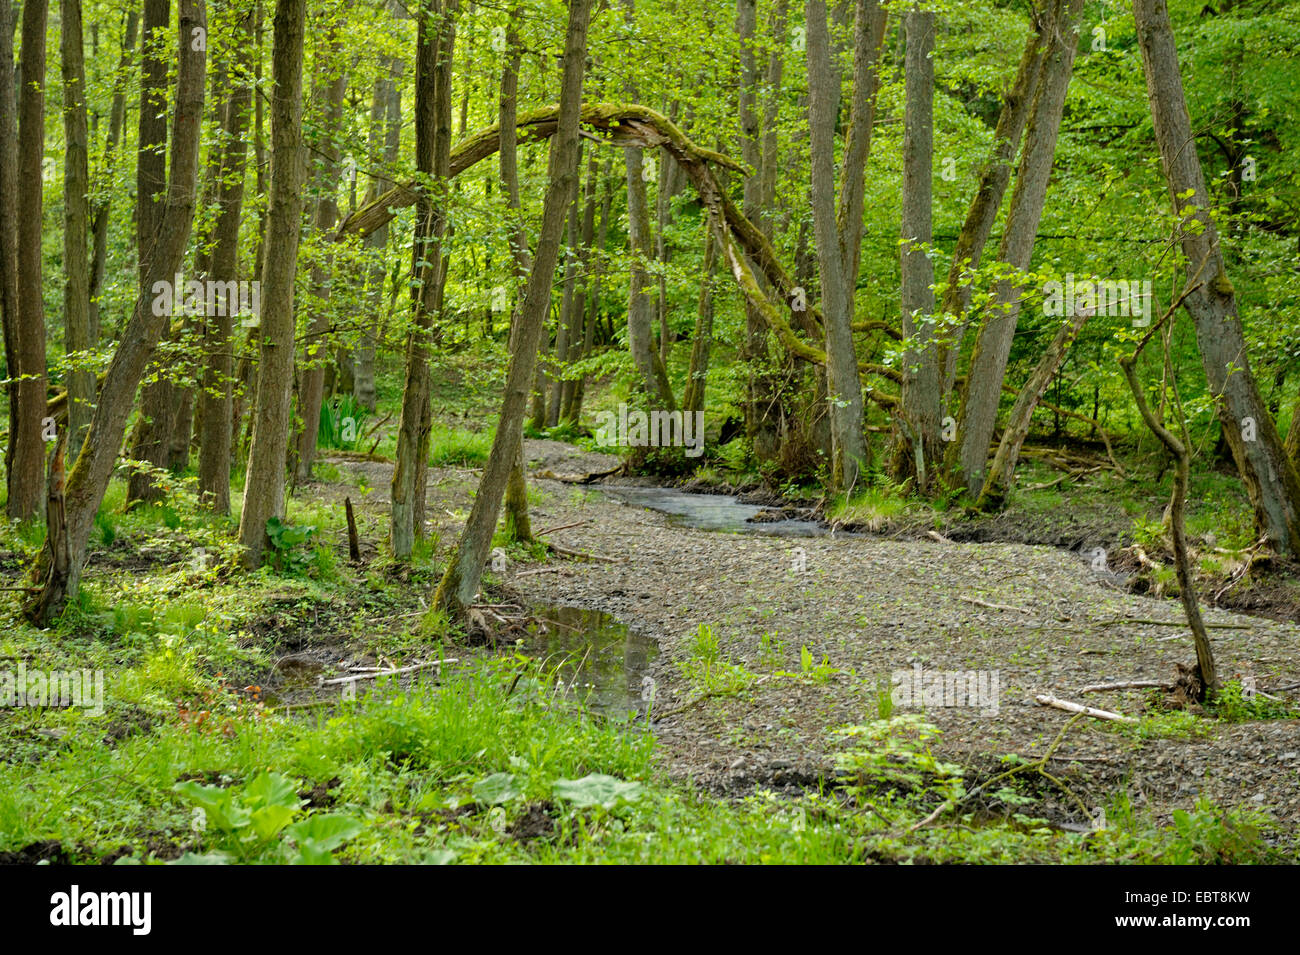 riverbed of the Banfe through a forest in the National Park Kellerwald-Edersee, Germany, Hesse, Kellerwald National Park Stock Photo